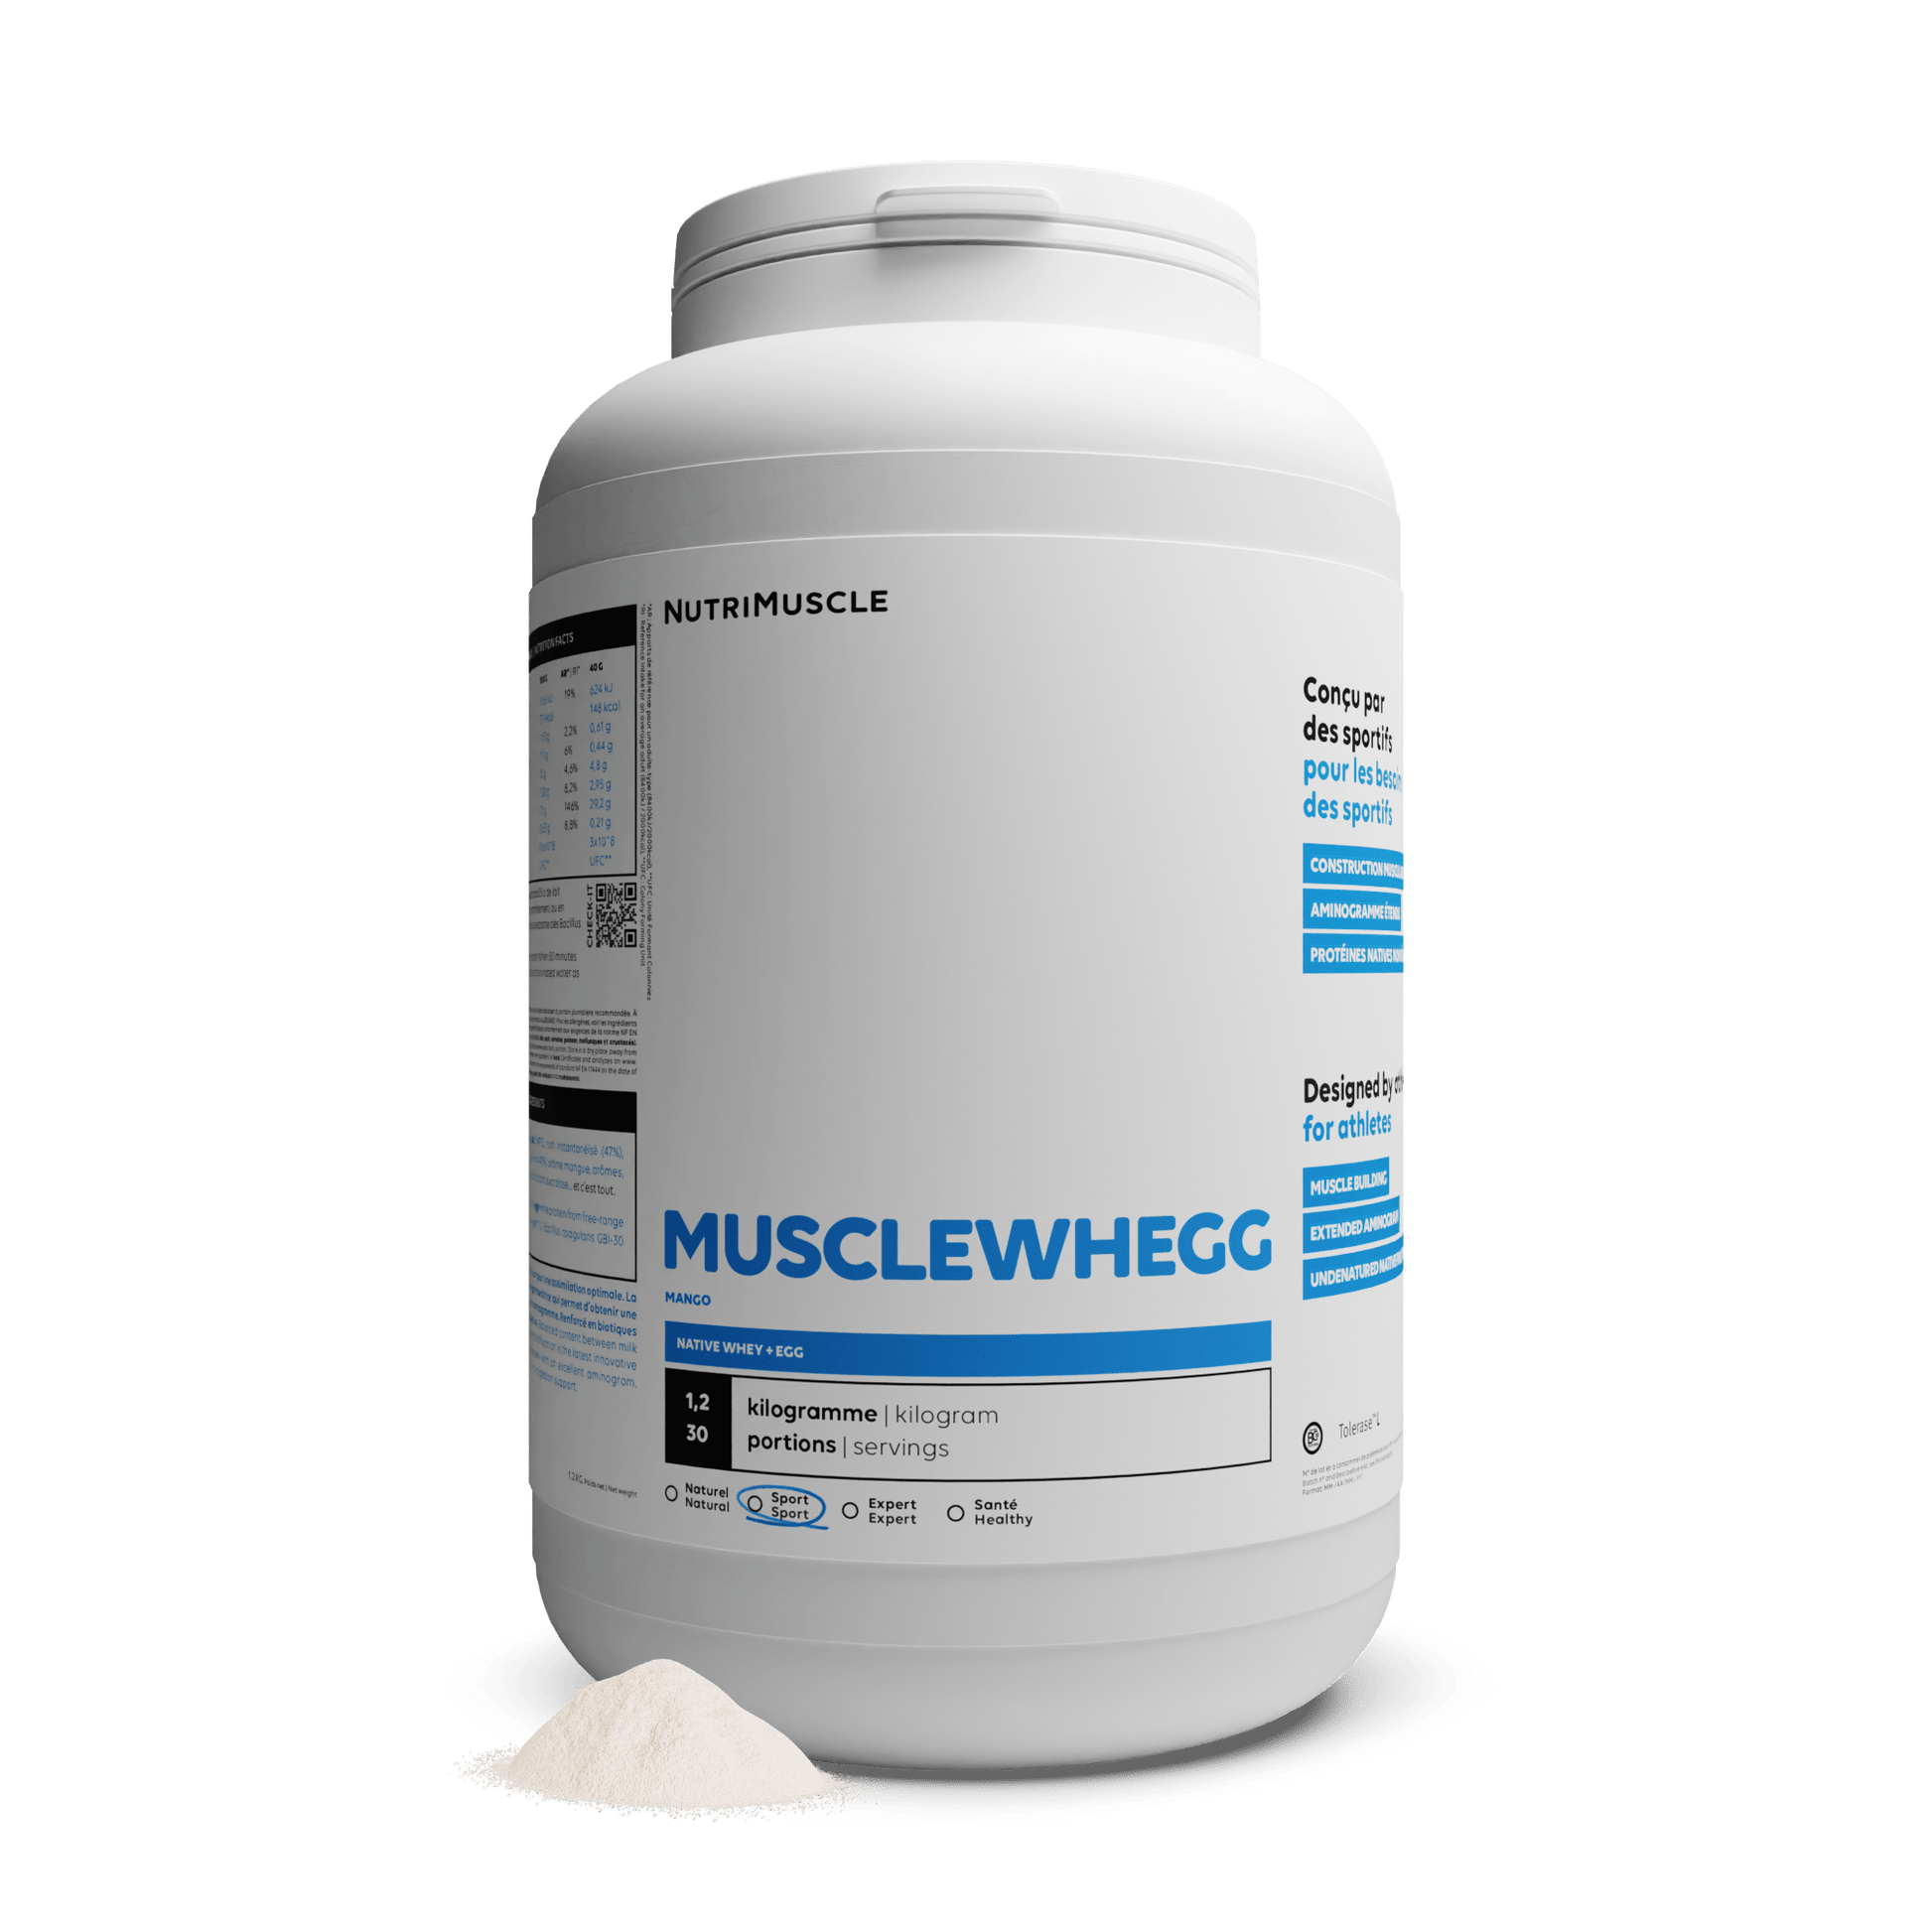 Nutrimuscle Protéines Mangue / 1.20 kg Musclewhegg - Mix Protein